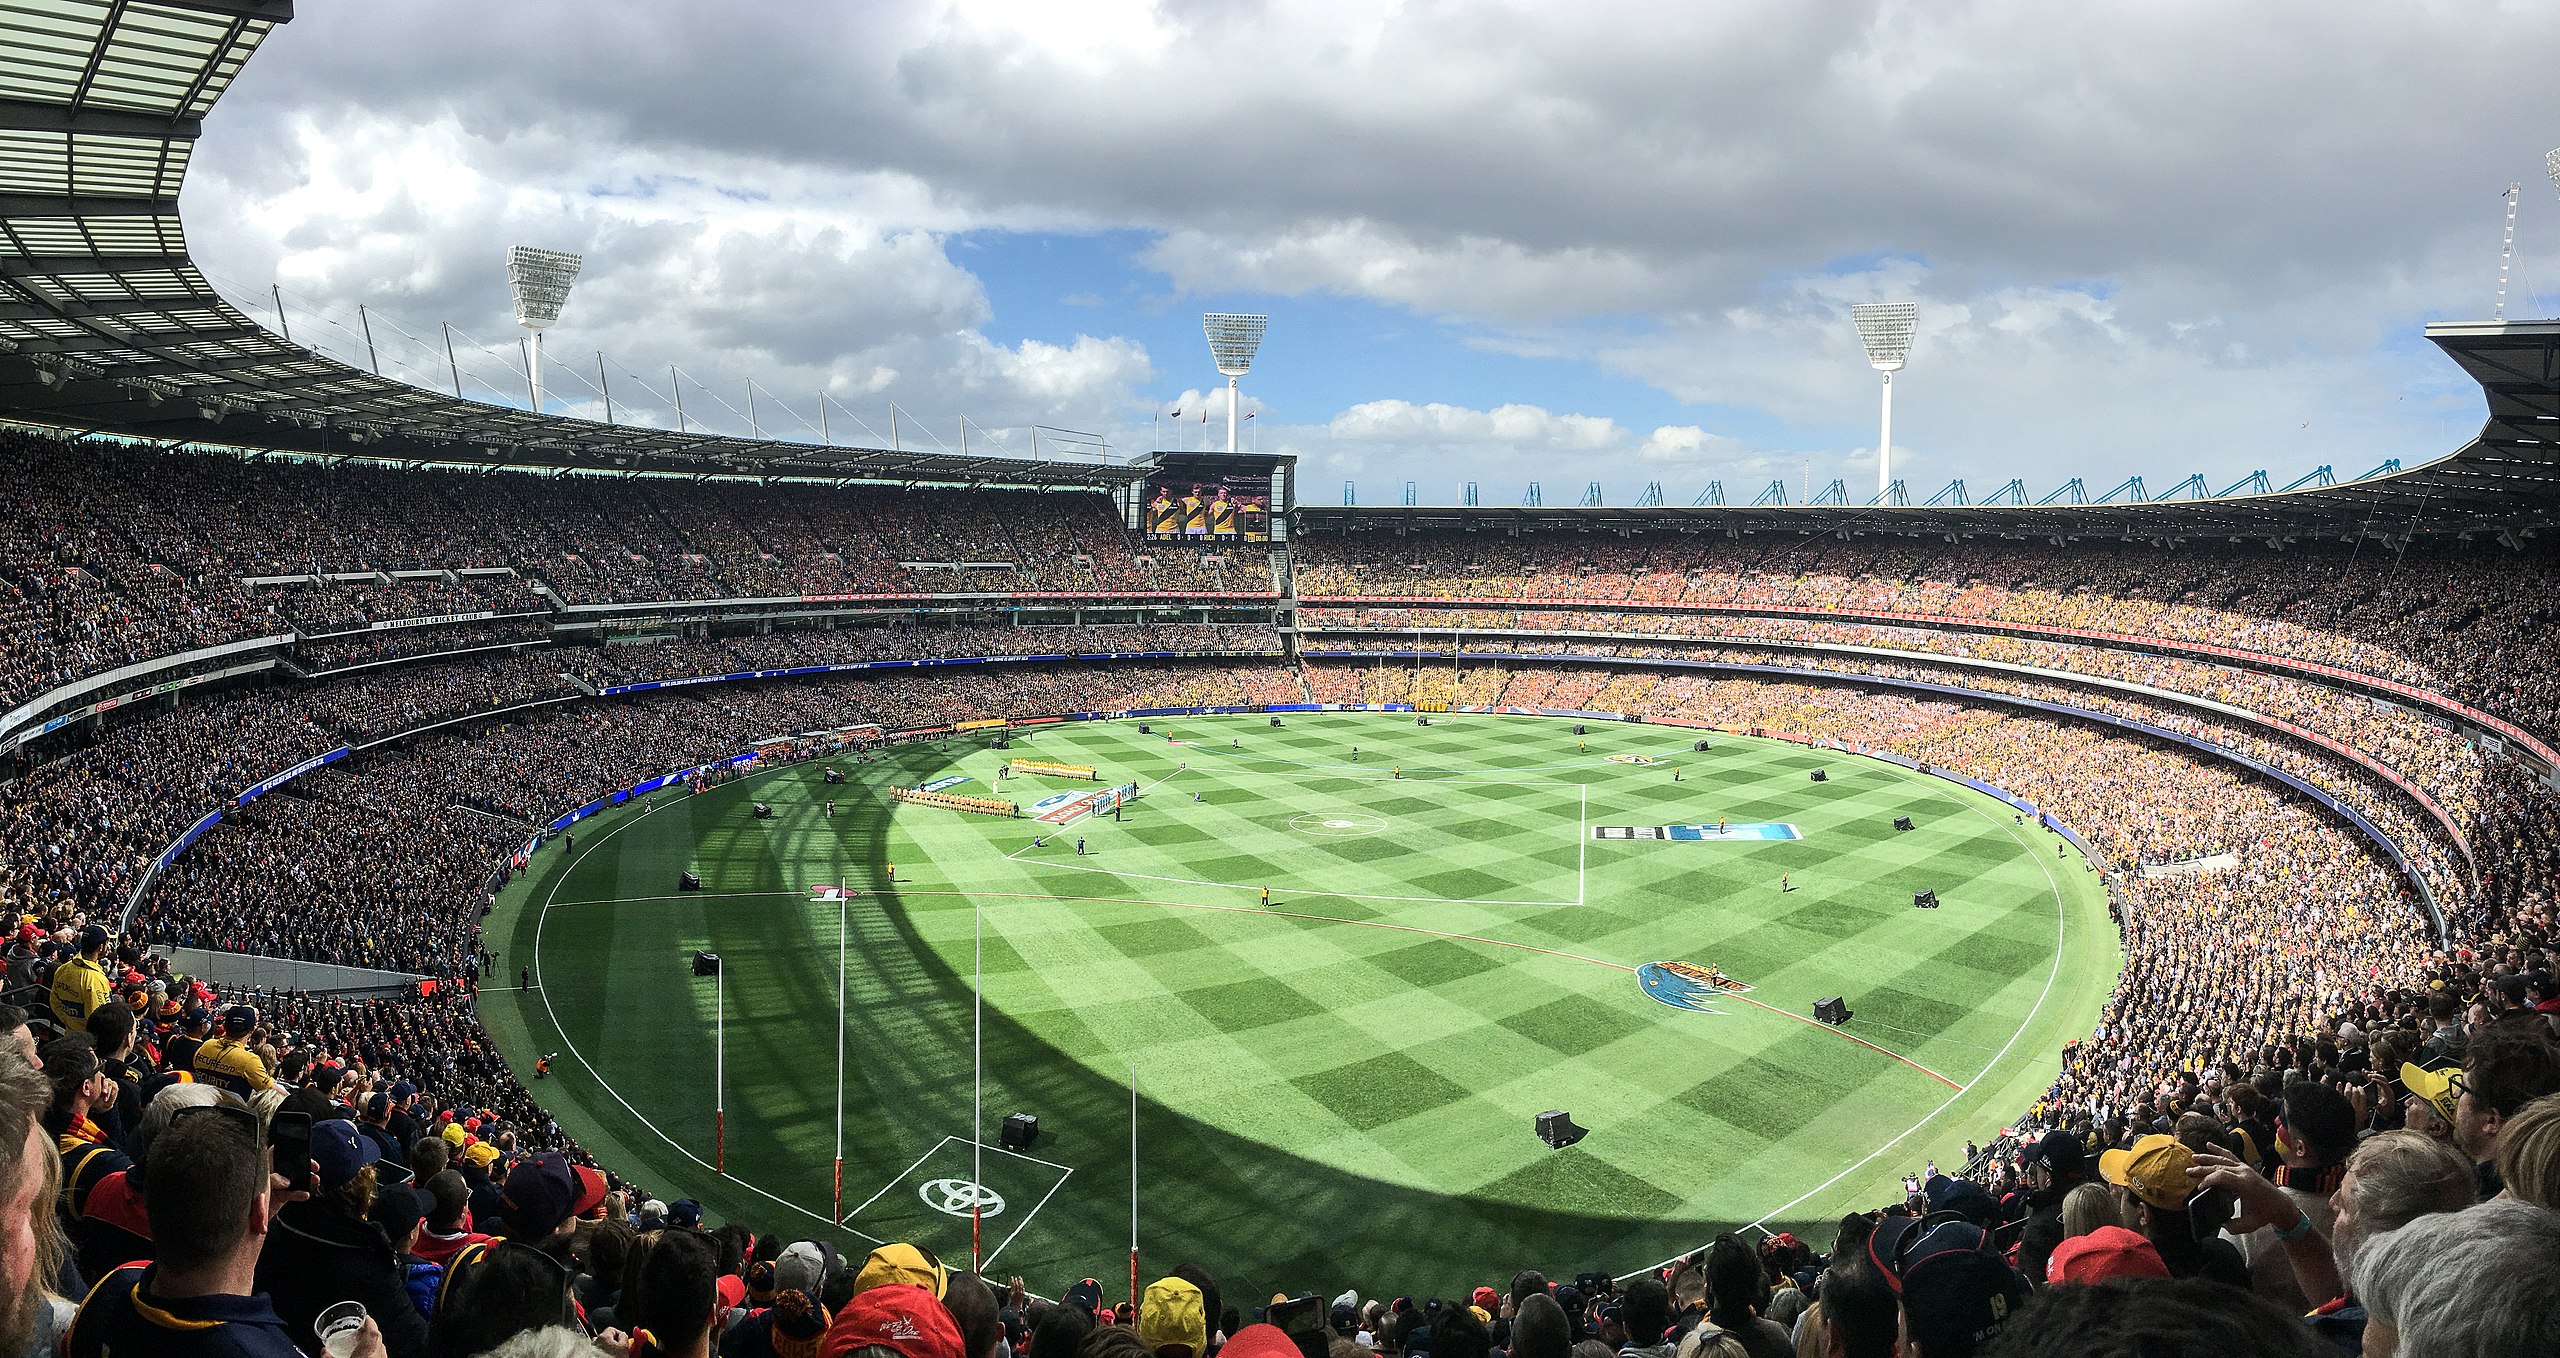 Melbourne Cricket Ground is also known as "The G", Melbourne Stars play their home games here.